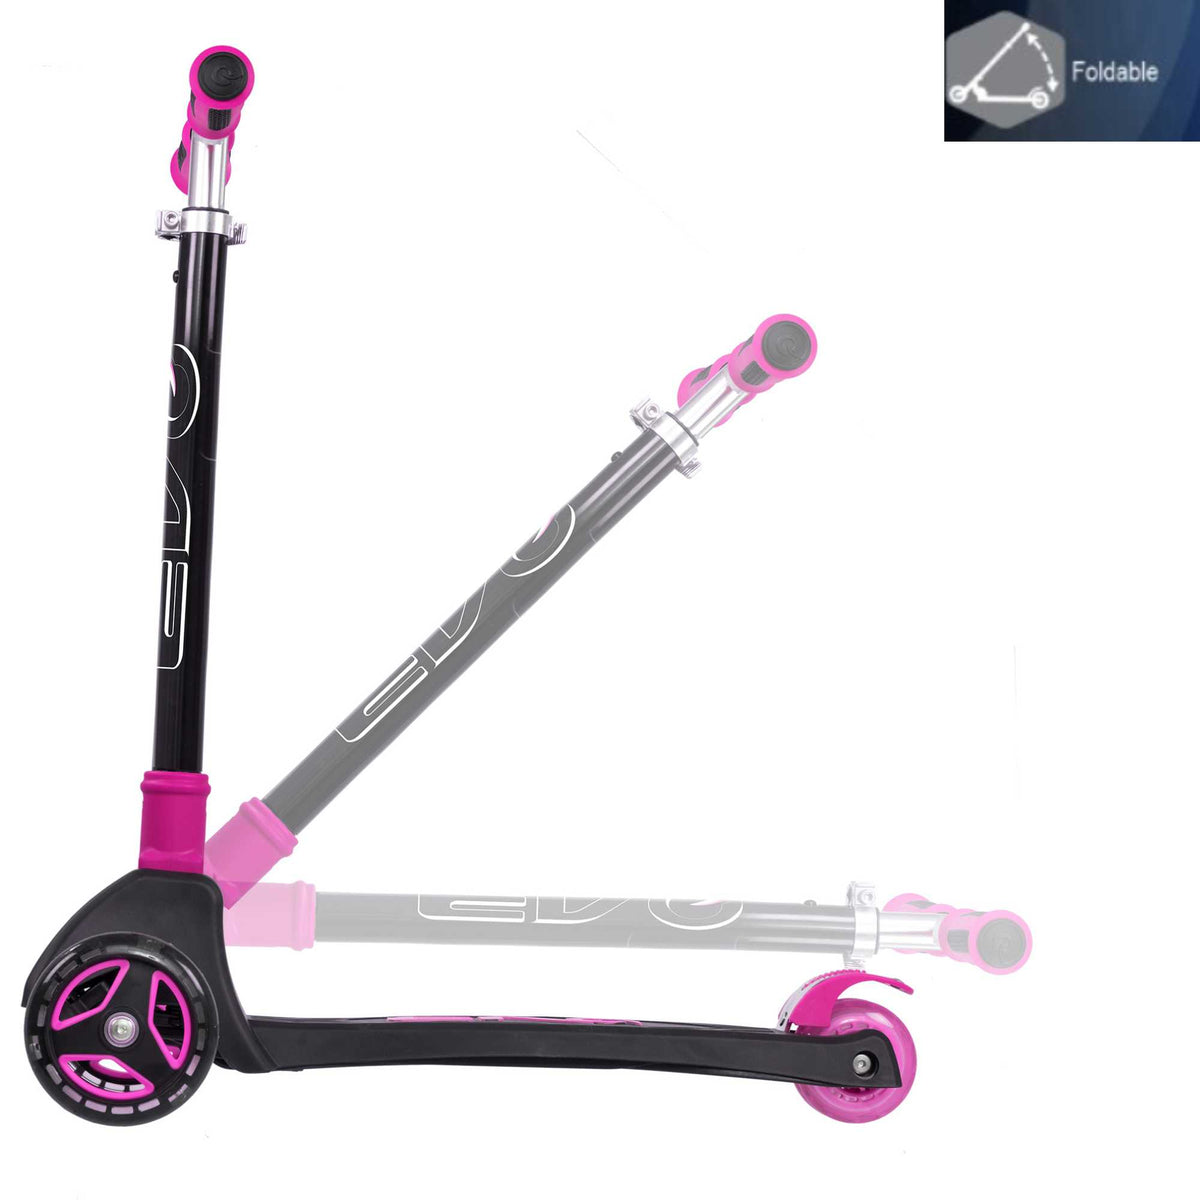 Move N Groove Scooter, Cruiser Scooter, Scooter for 5 year olds, Light Up Scooter, Light Up Wheels, Three Wheeled Scooter, Balance Scooter